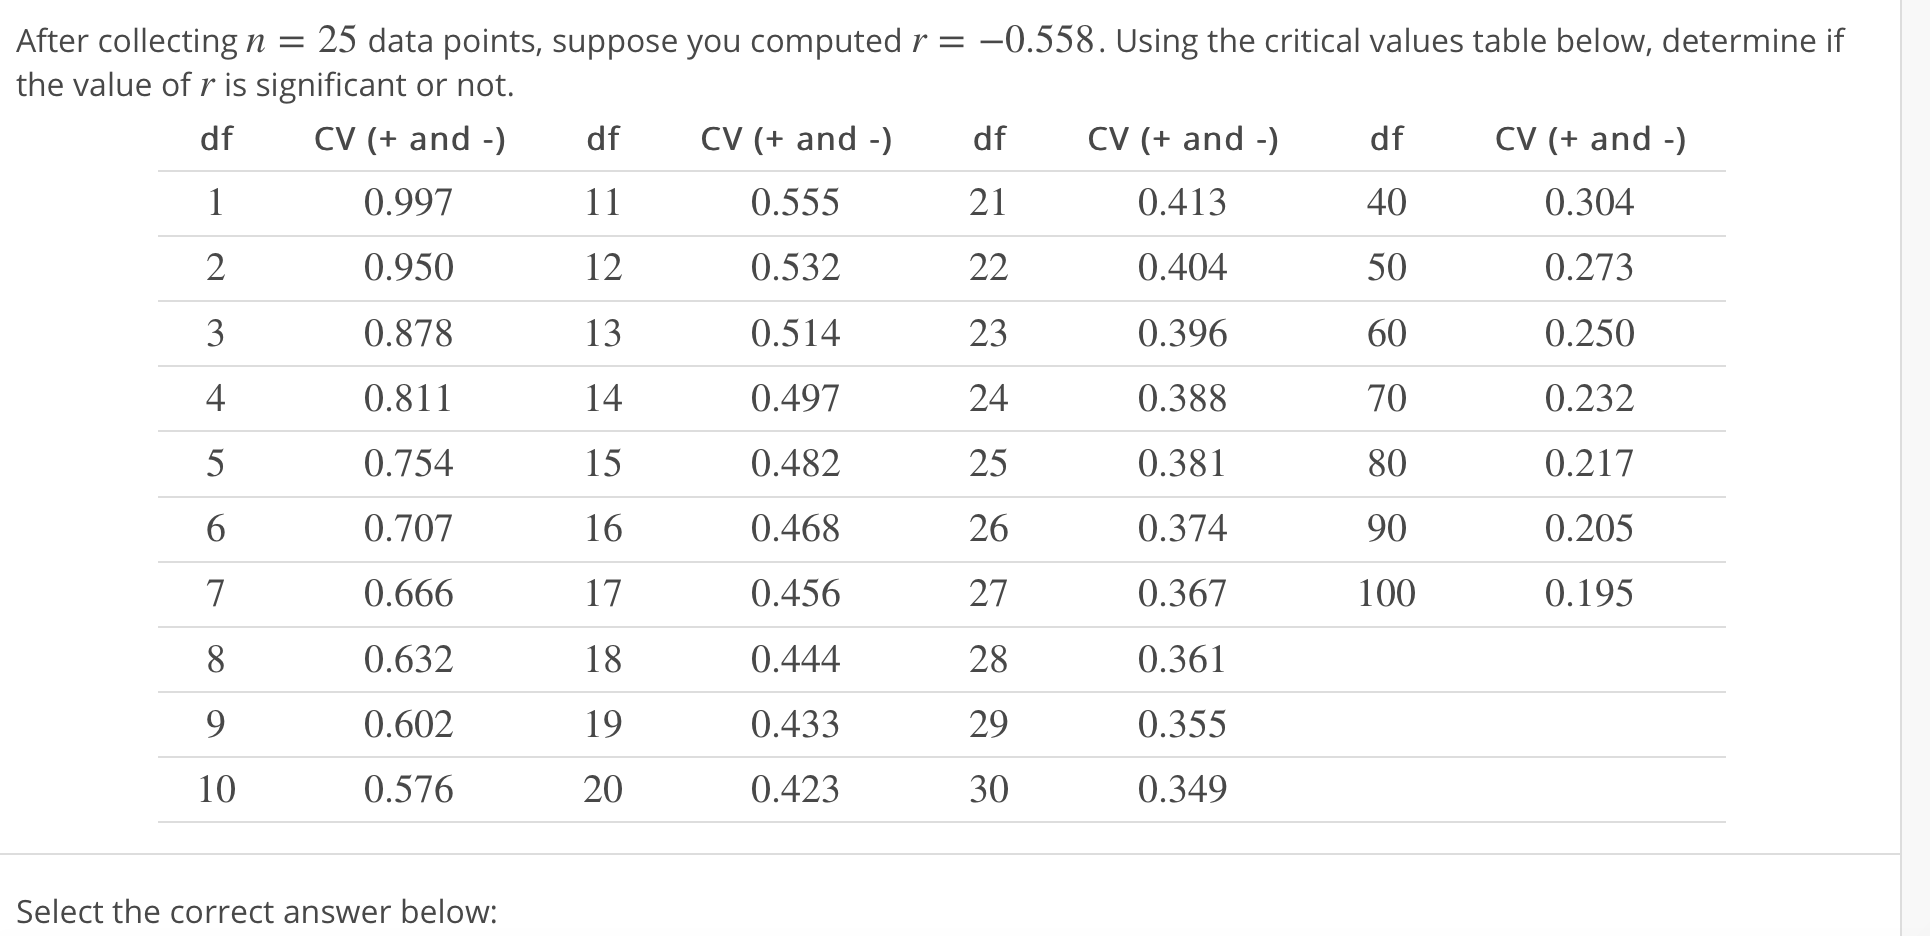 After collecting n = 25 data points, suppose you computed r
the value of r is significant or not.
-0.558. Using the critical values table below, determine if
df
40
50
60
70
80
90
100
df CV (+ and
0.997
0.950
0.878
0.811
0.754
0.707
0.666
0.632
0.602
0.576
df CV (+ and - dfCV (+ and -)
CV (+ and -)
0.304
0.273
0.250
0.232
0.217
0.205
0.195
21
0.555
0.532
0.514
0.497
0.482
0.468
0.456
0.444
0.433
0.423
0.413
0.404
0.396
0.388
0.381
0.374
0.367
0.361
0.355
0.349
12
2
3
4
13
23
24
25
26
27
28
29
30
15
16
17
18
19
20
10
Select the correct answer below:
